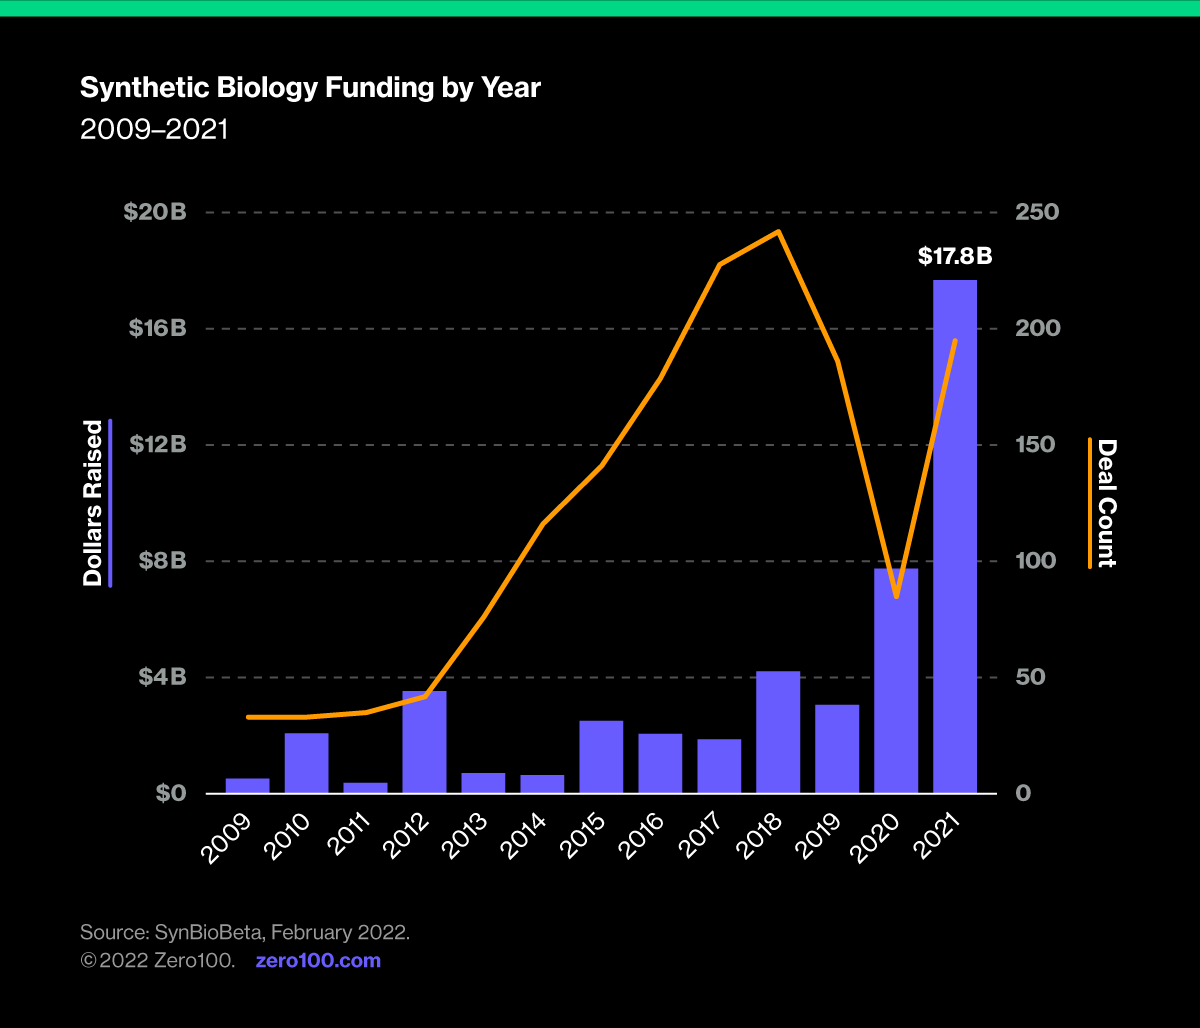 Graph depicting synthetic biology funding by year, from 2009 to 2021. Source: SynBioBeta, February 2022.